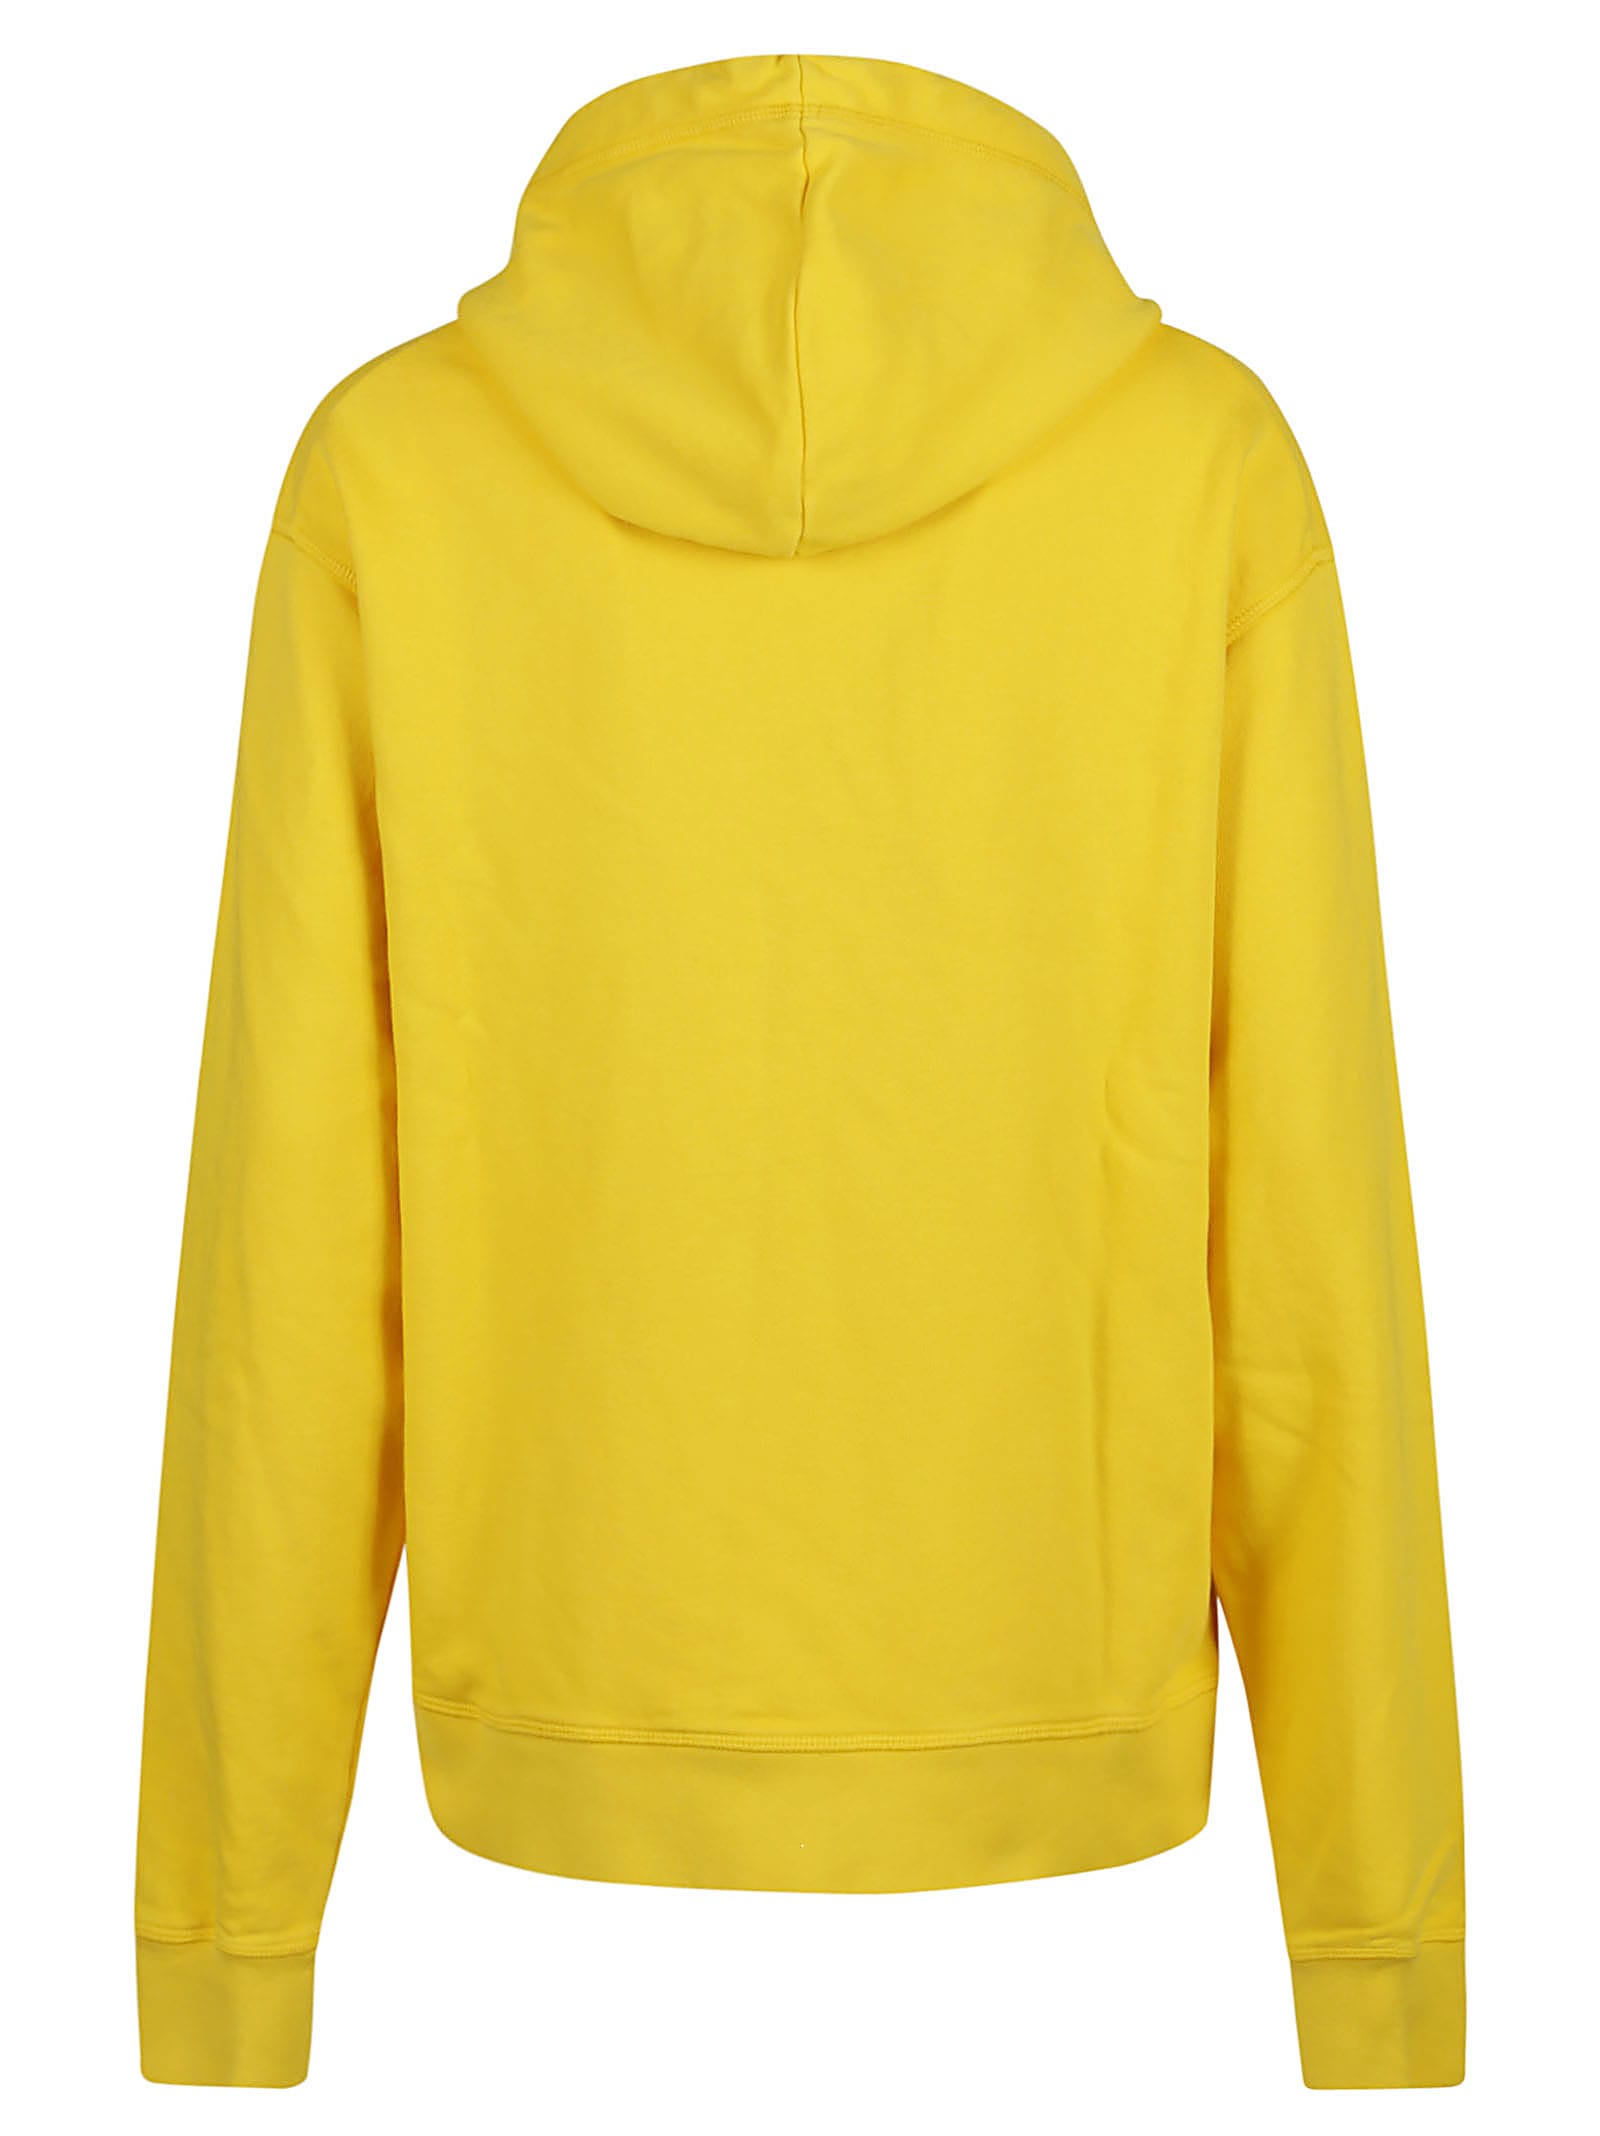 Shop Dsquared2 Cool Sweatshirt In Cyber Yellow